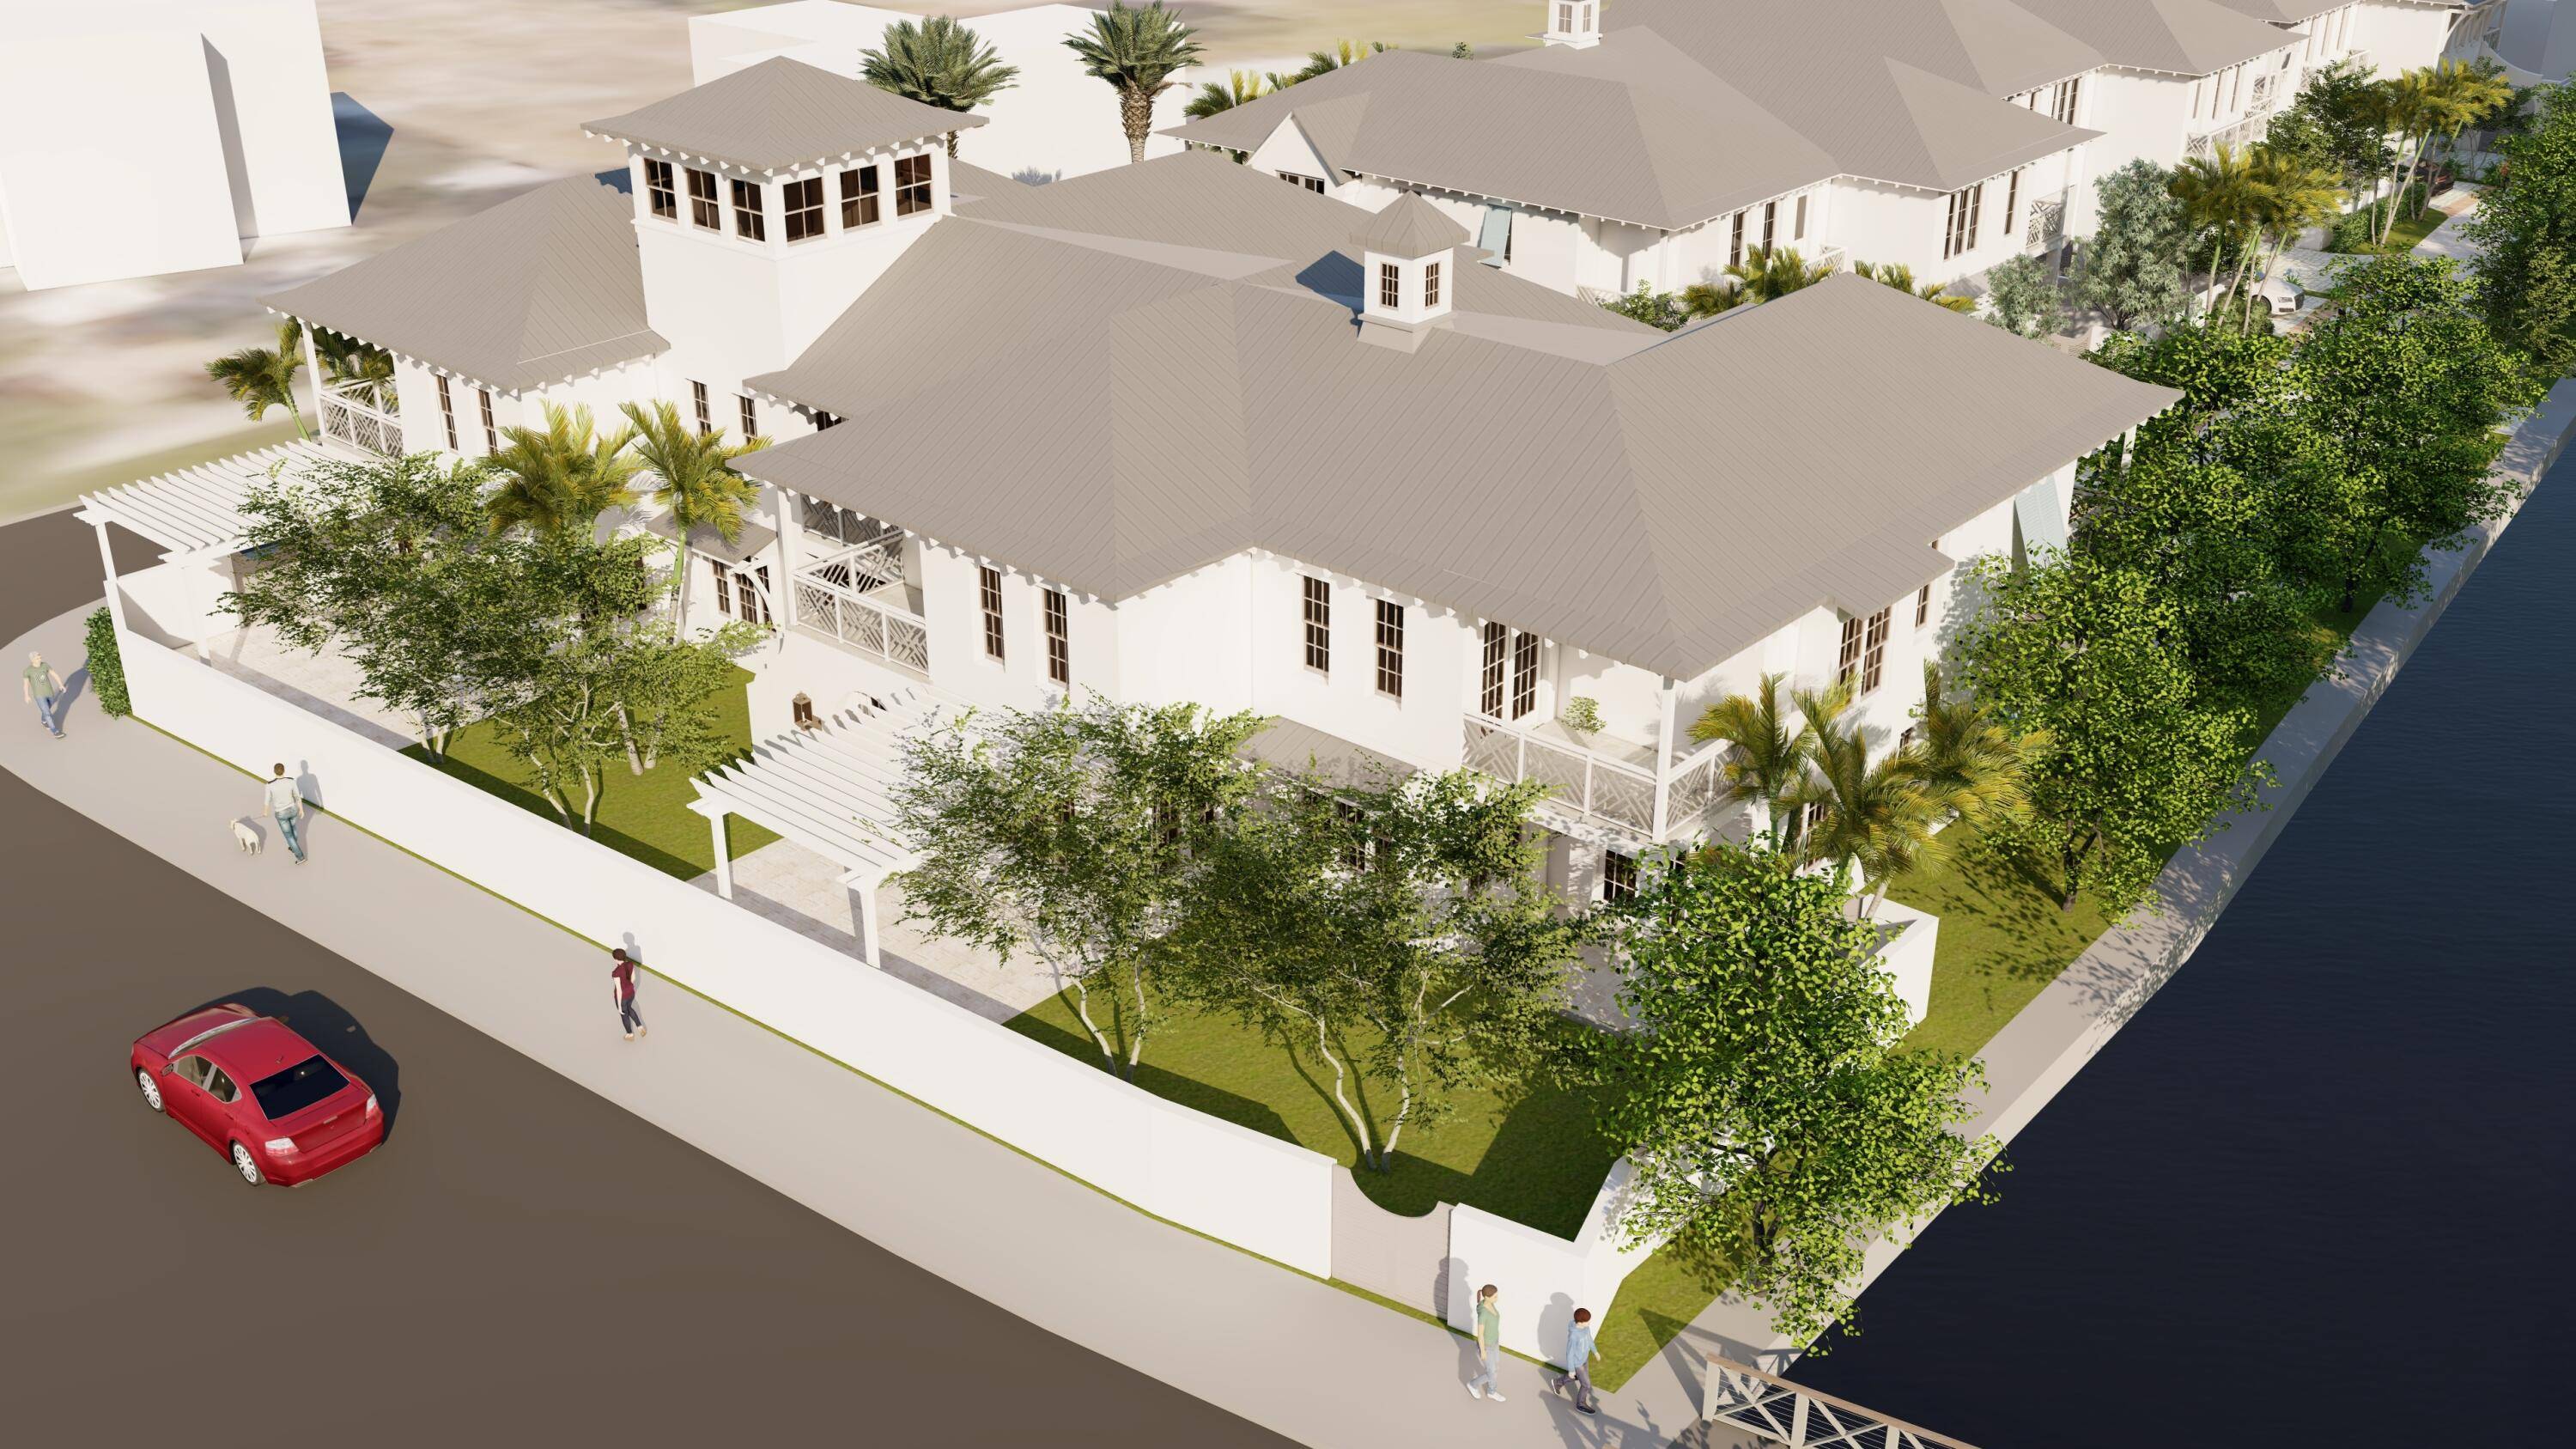 Here is your opportunity to experience this groundbreaking development connecting Fort Pierce's historic downtown with Edgartown.